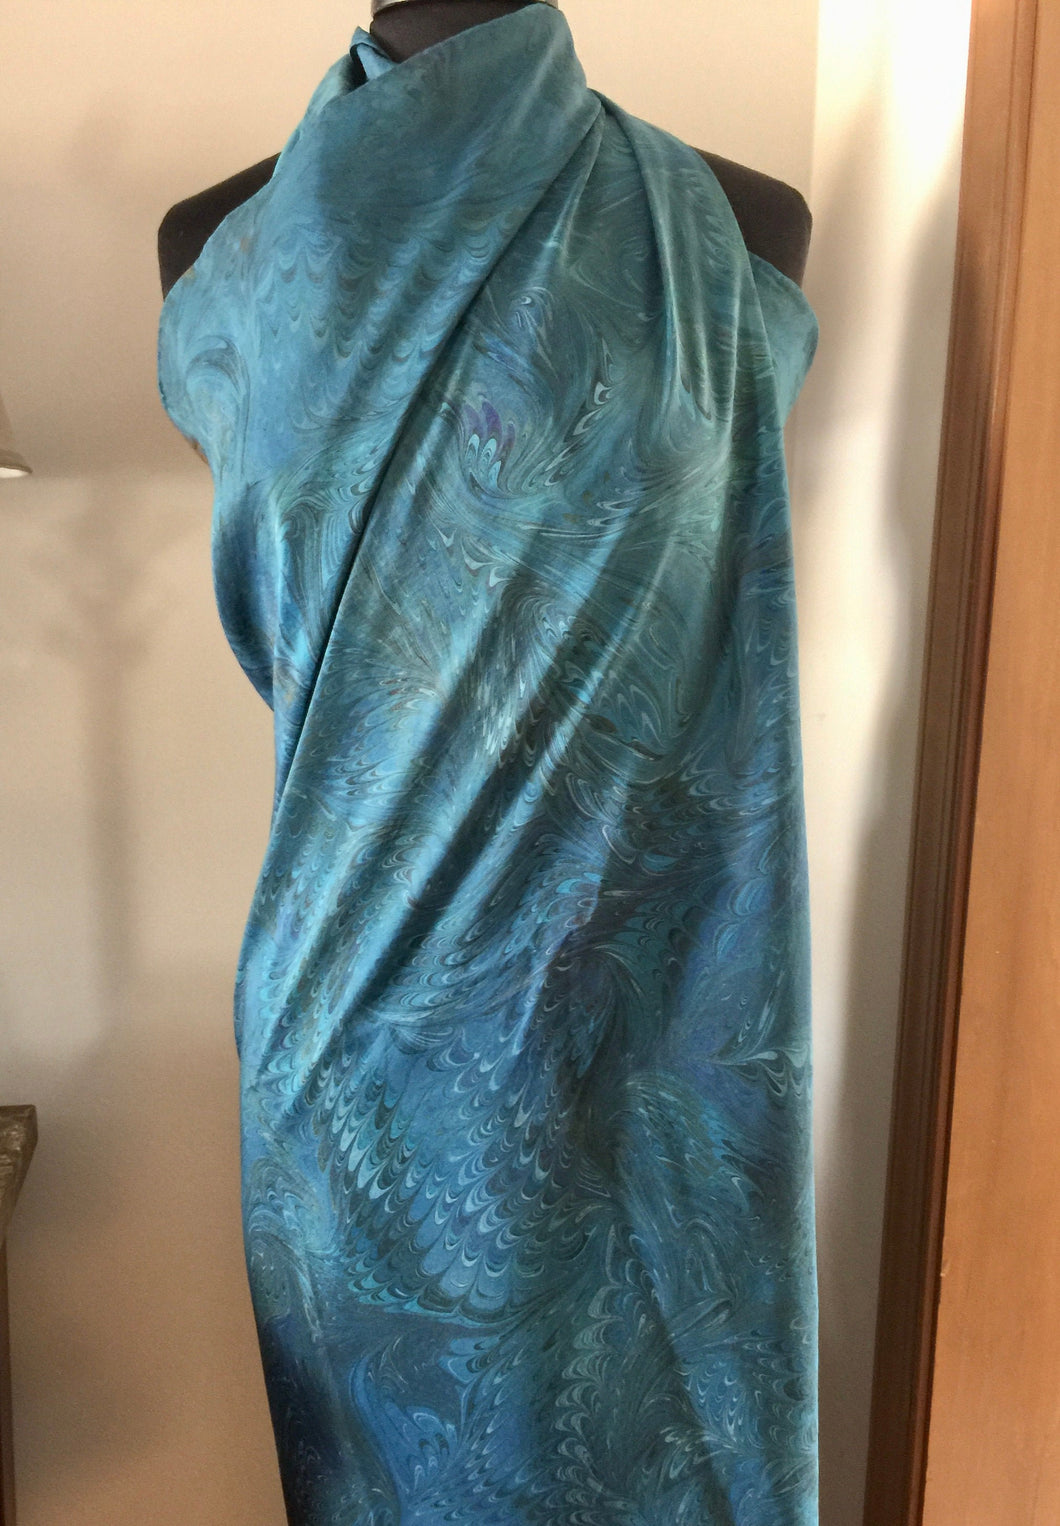 Sarong Wrap 44x69 water marbled Habotai Silk combed and swirled in shades of teal, aqua and navy blue.